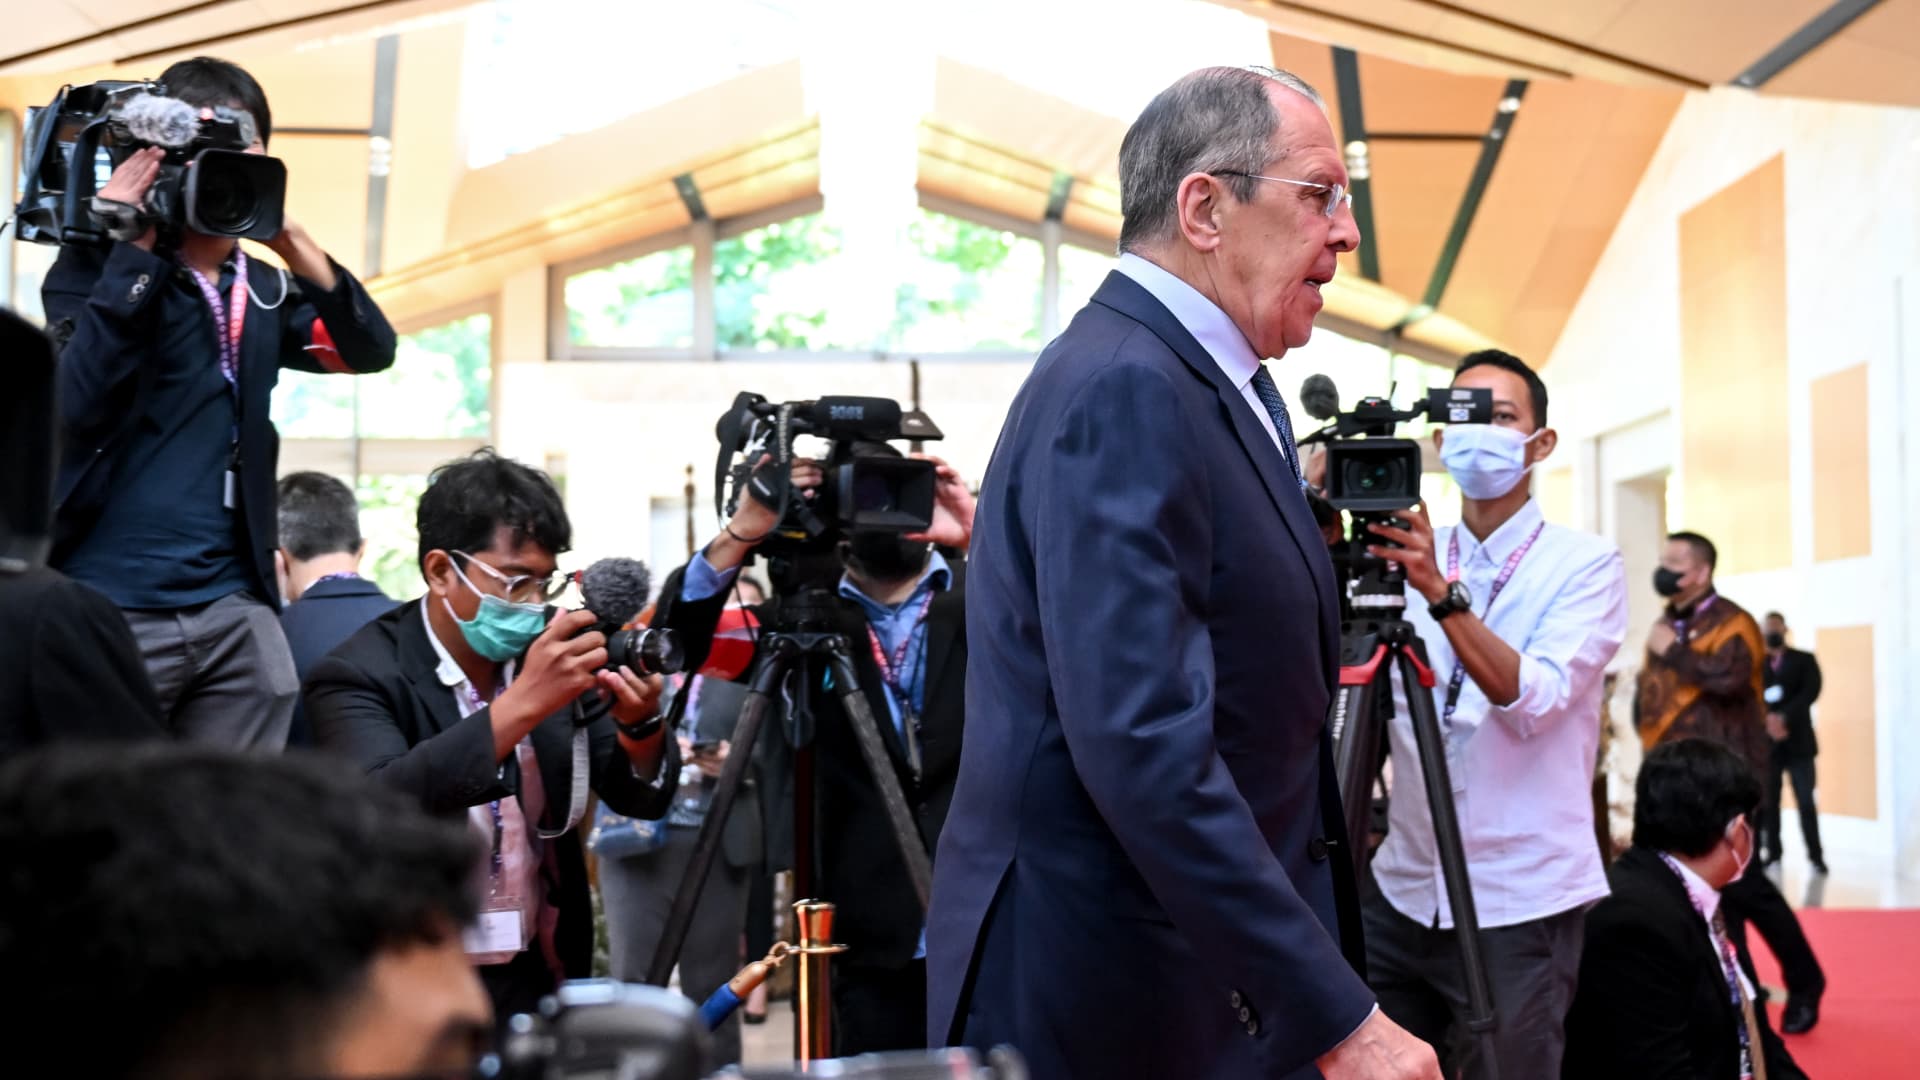 Russian Foreign Minister Sergei Lavrov arrives for the G-20 Foreign Ministers' Meeting in Indonesia.